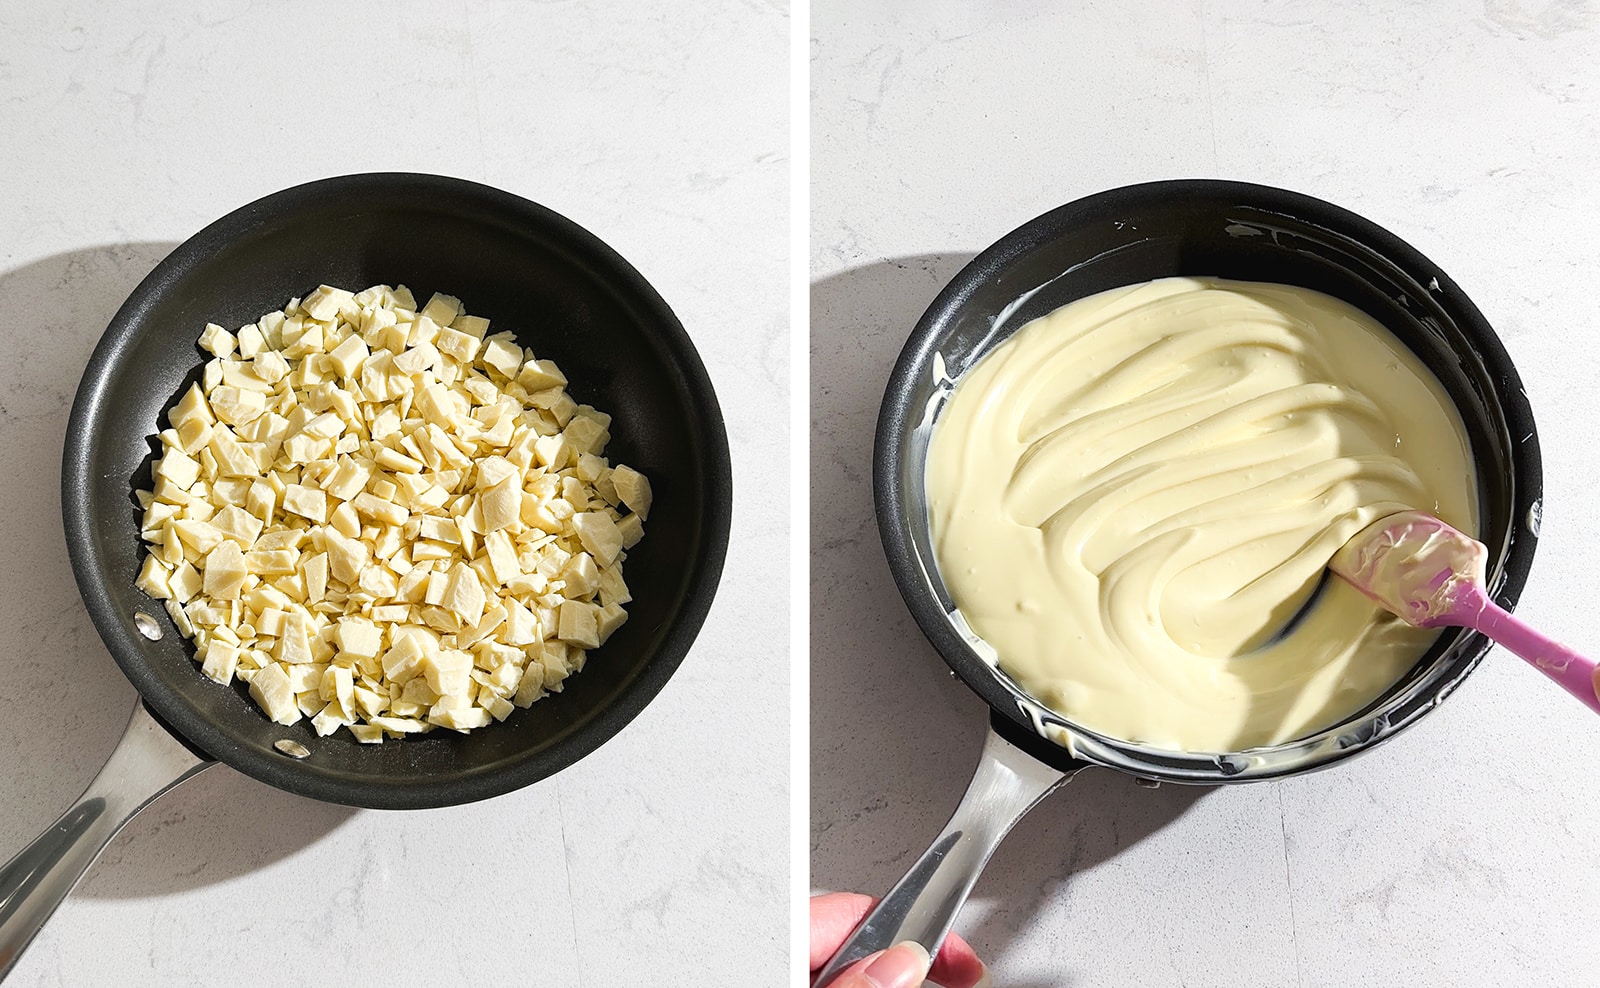 Melting white chocolate in a pan.